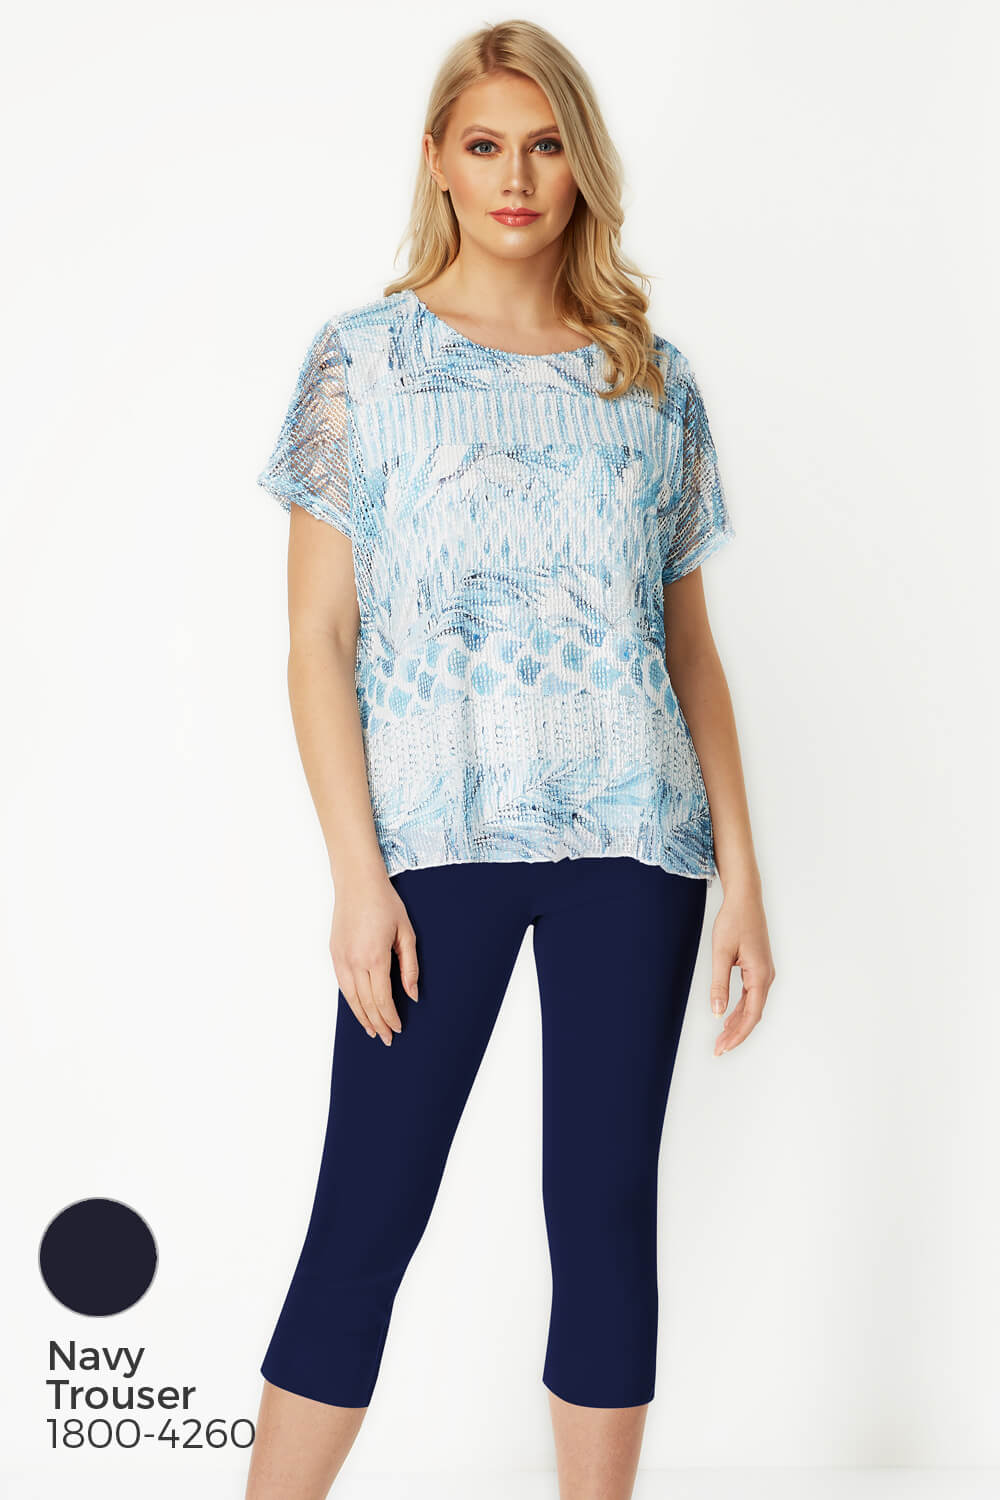 Blue Tropical Print Net Overlay Top, Image 7 of 8